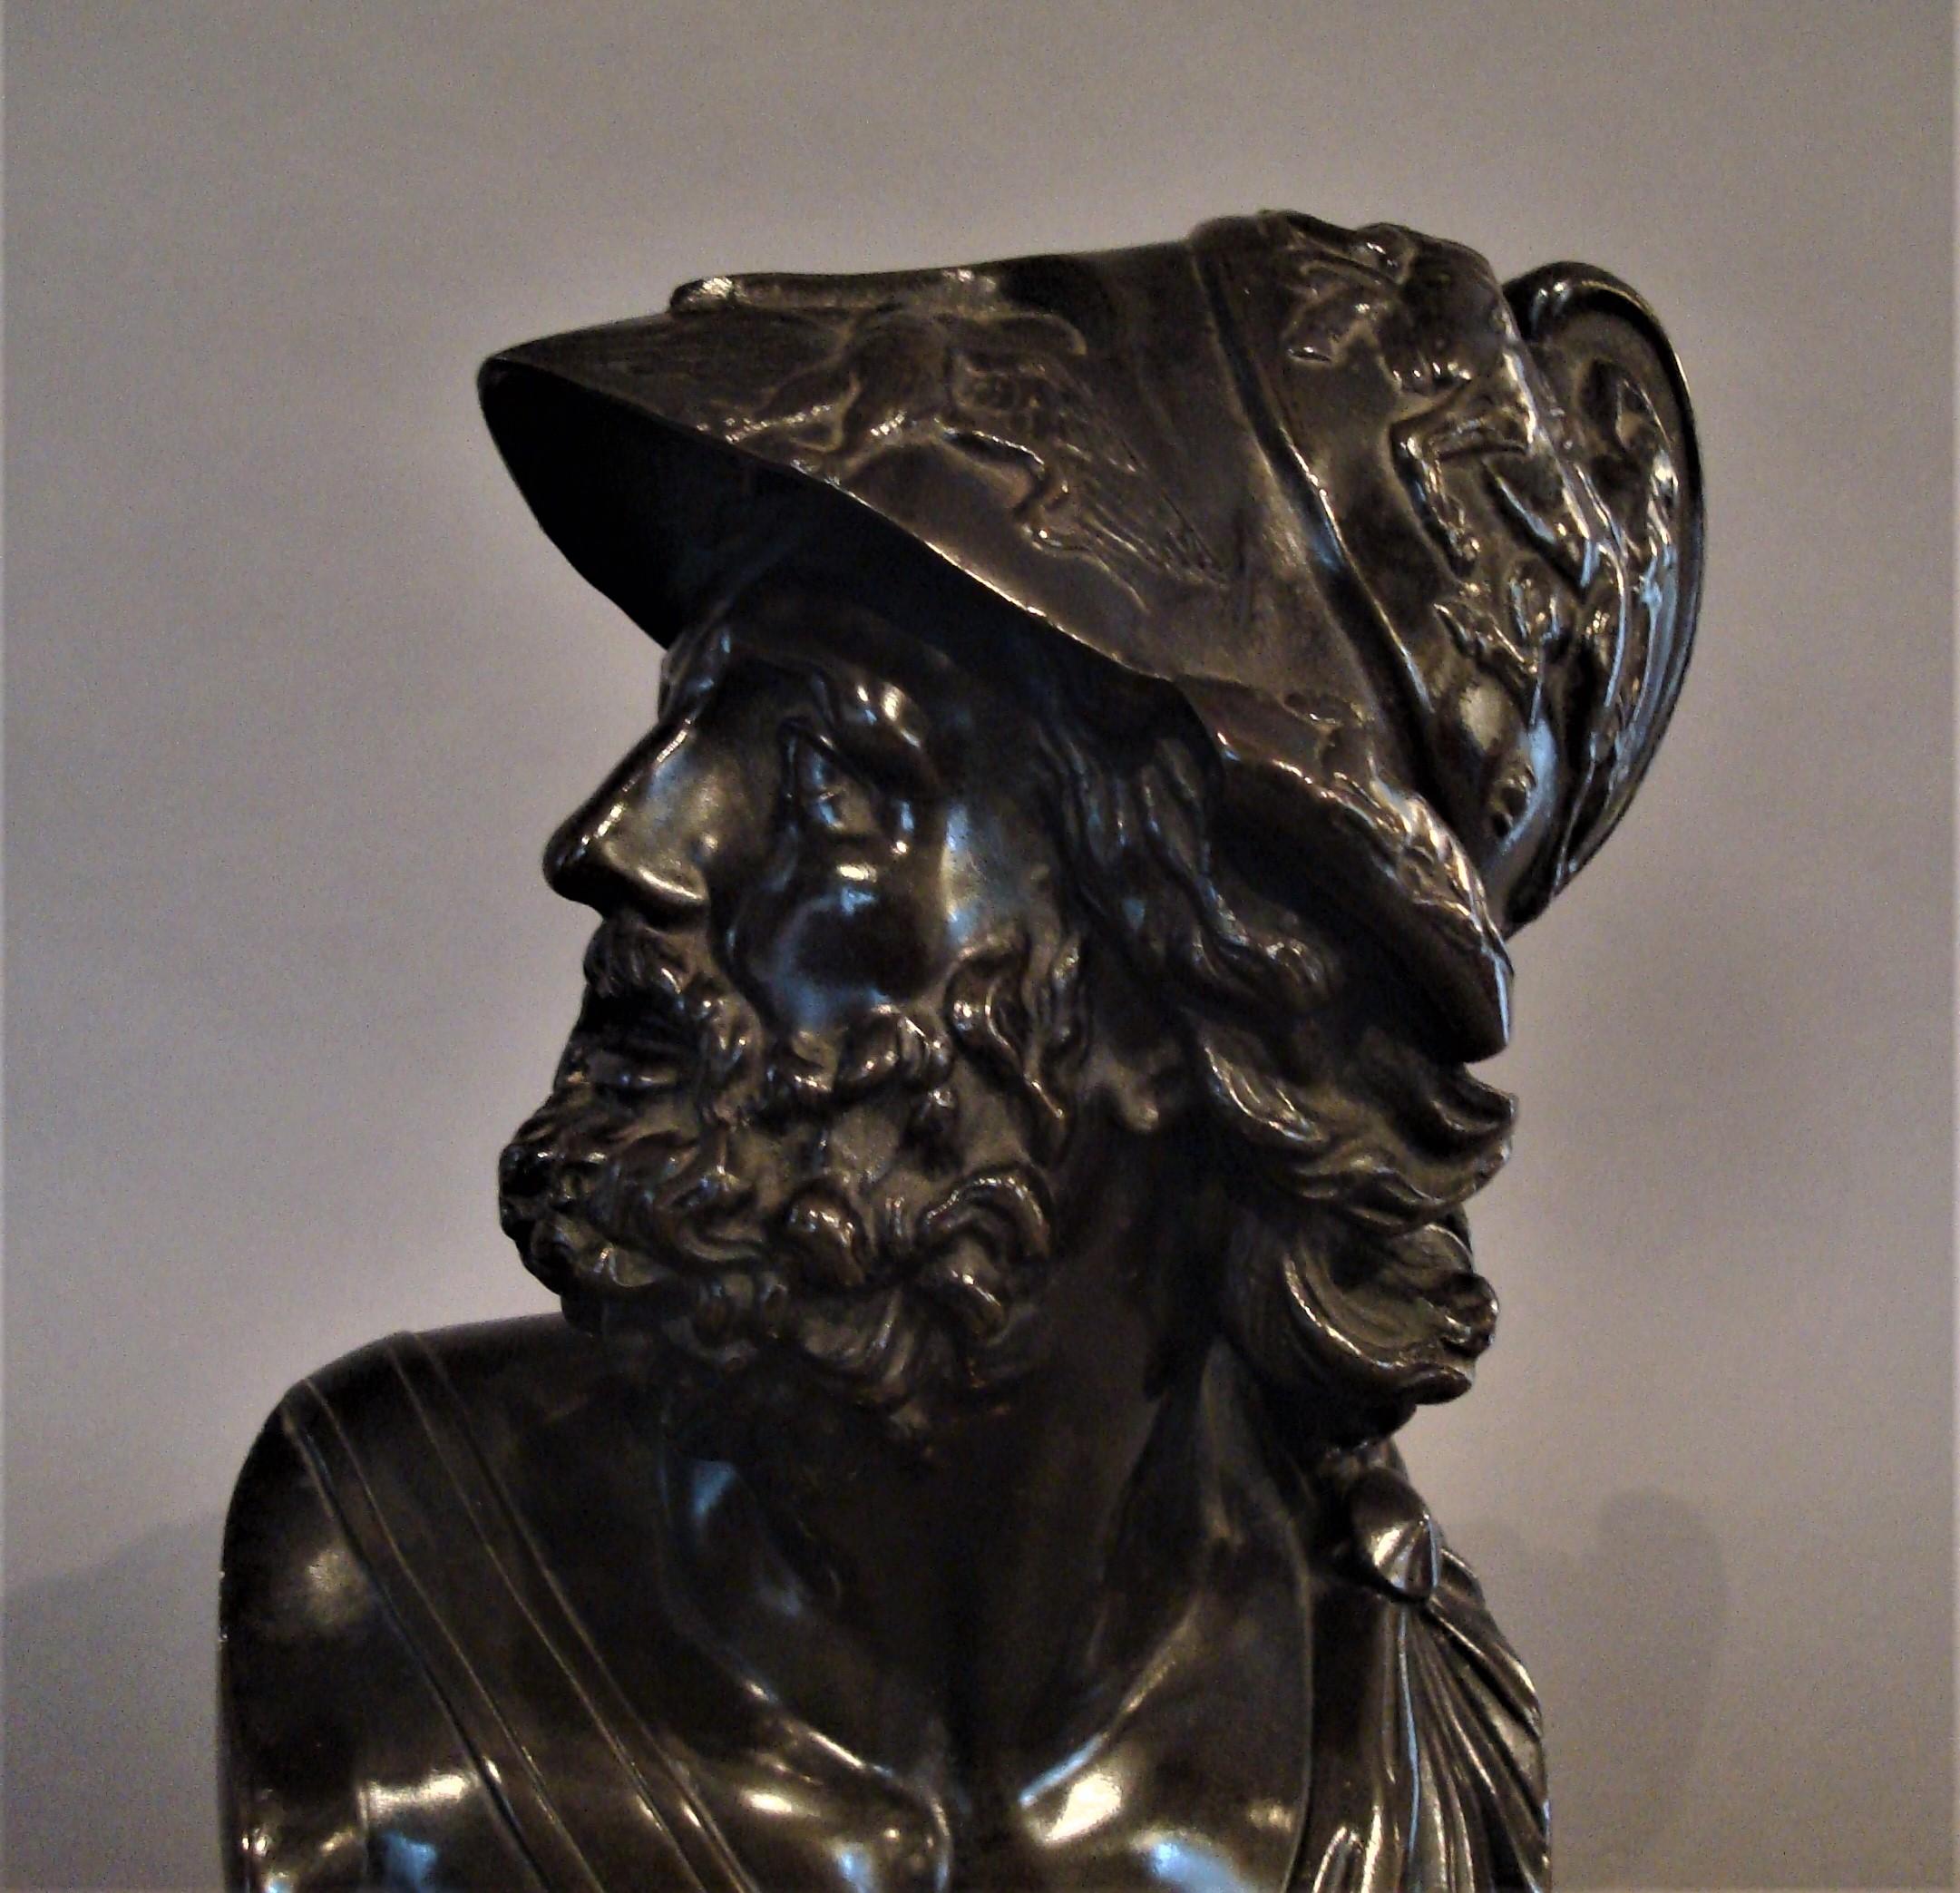 19th century bronze Grand Tour bust of Ajax; depicting the Greek hero looking dexter, bearded and with flowing hair, his helmet cast with centaurs fighting soldiers, and crouching panthers below, the peak with a pair of eagles. His chest with a sash